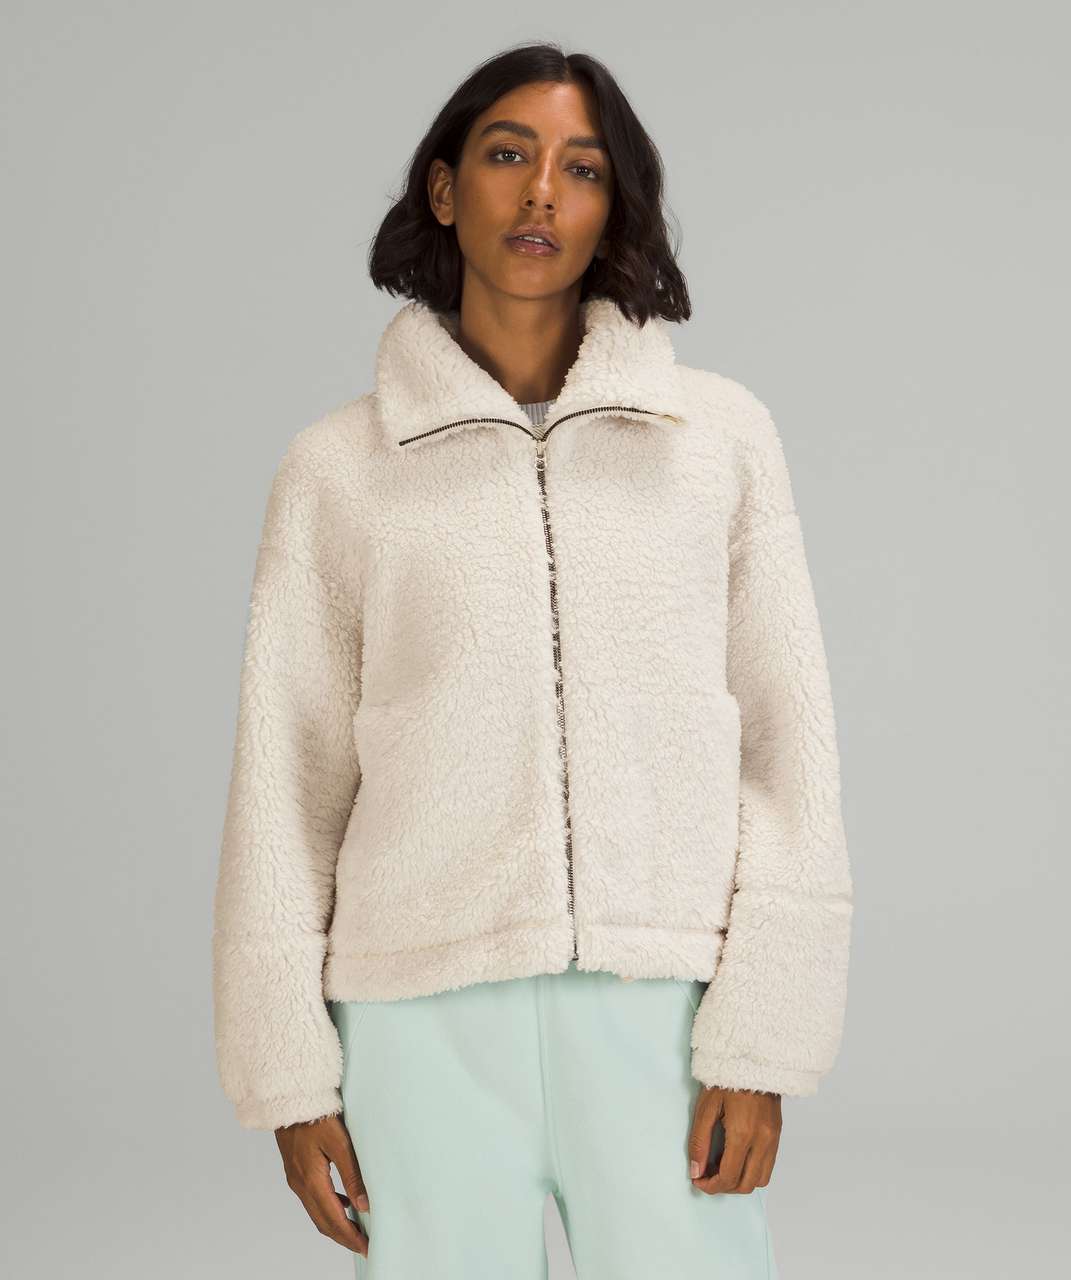 My favourite cosy winter off duty (mostly) Lulu out fit! Texture Play Crew  Sweater in White Opal, Reversible Fleece Jacket Dark olive, topped off with  EBB in White Opal Fleece! I'm from